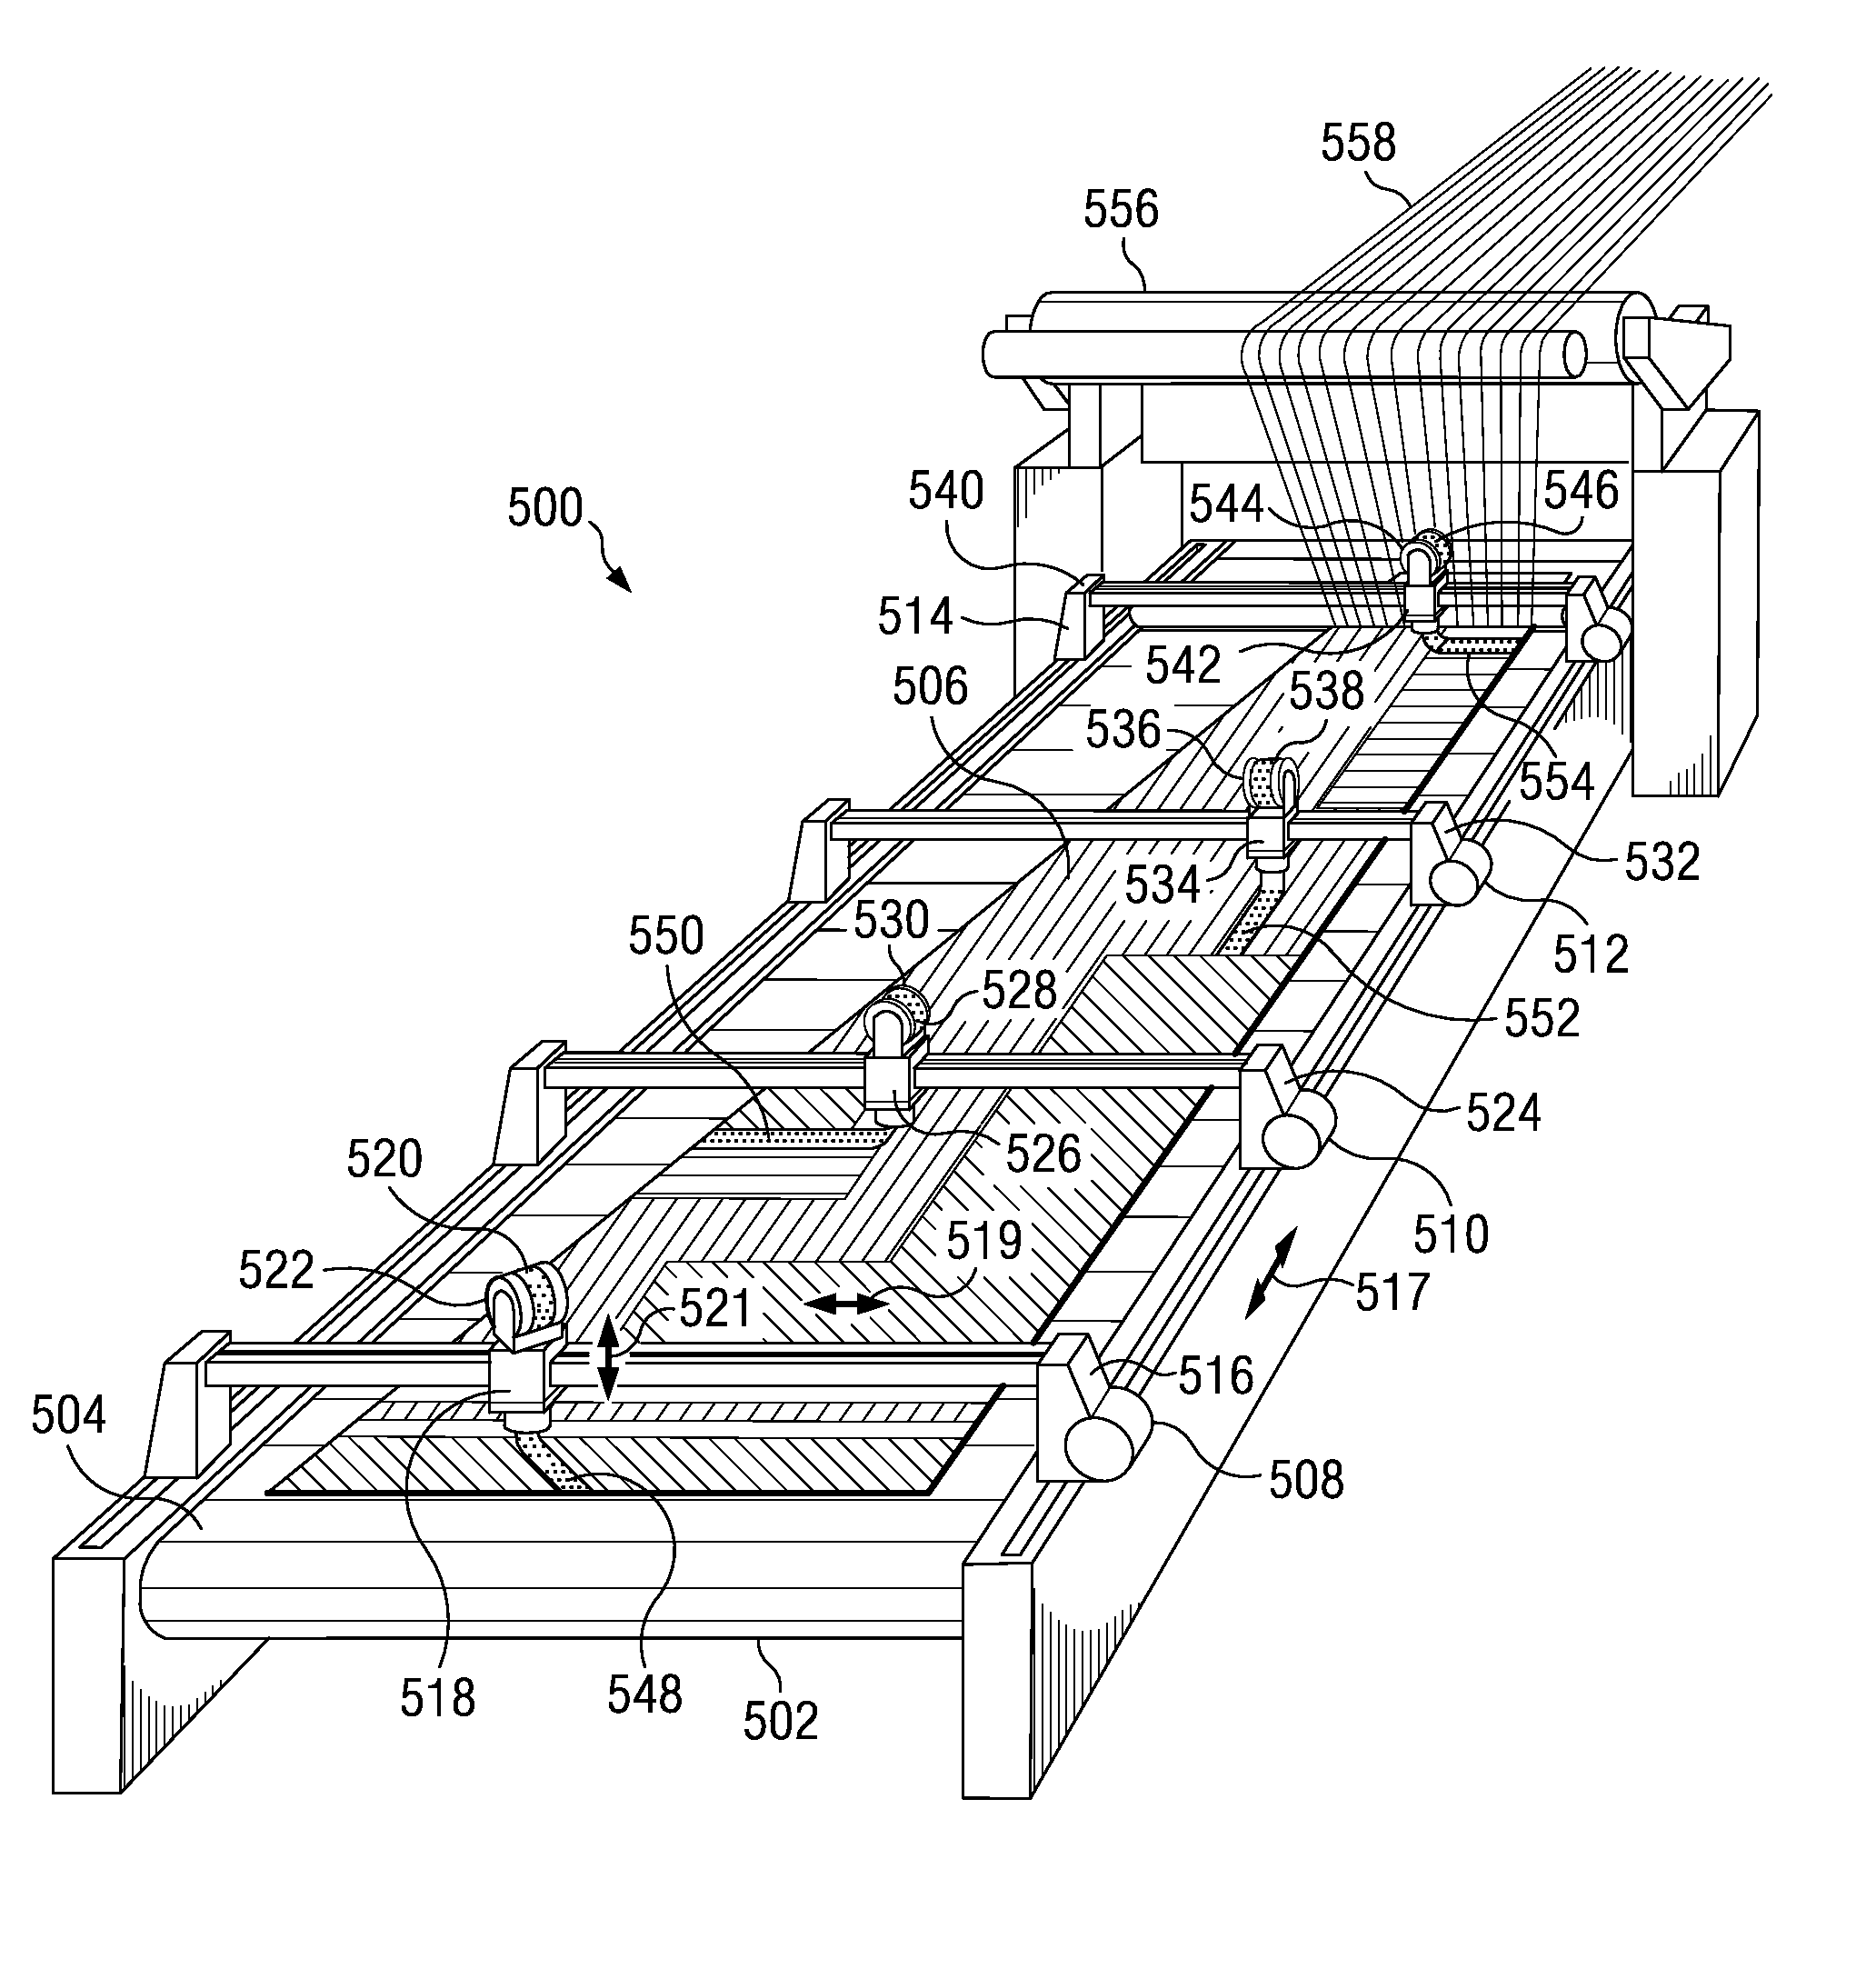 Method and apparatus for low-bulk toughened fabrics for low-pressure molding processes